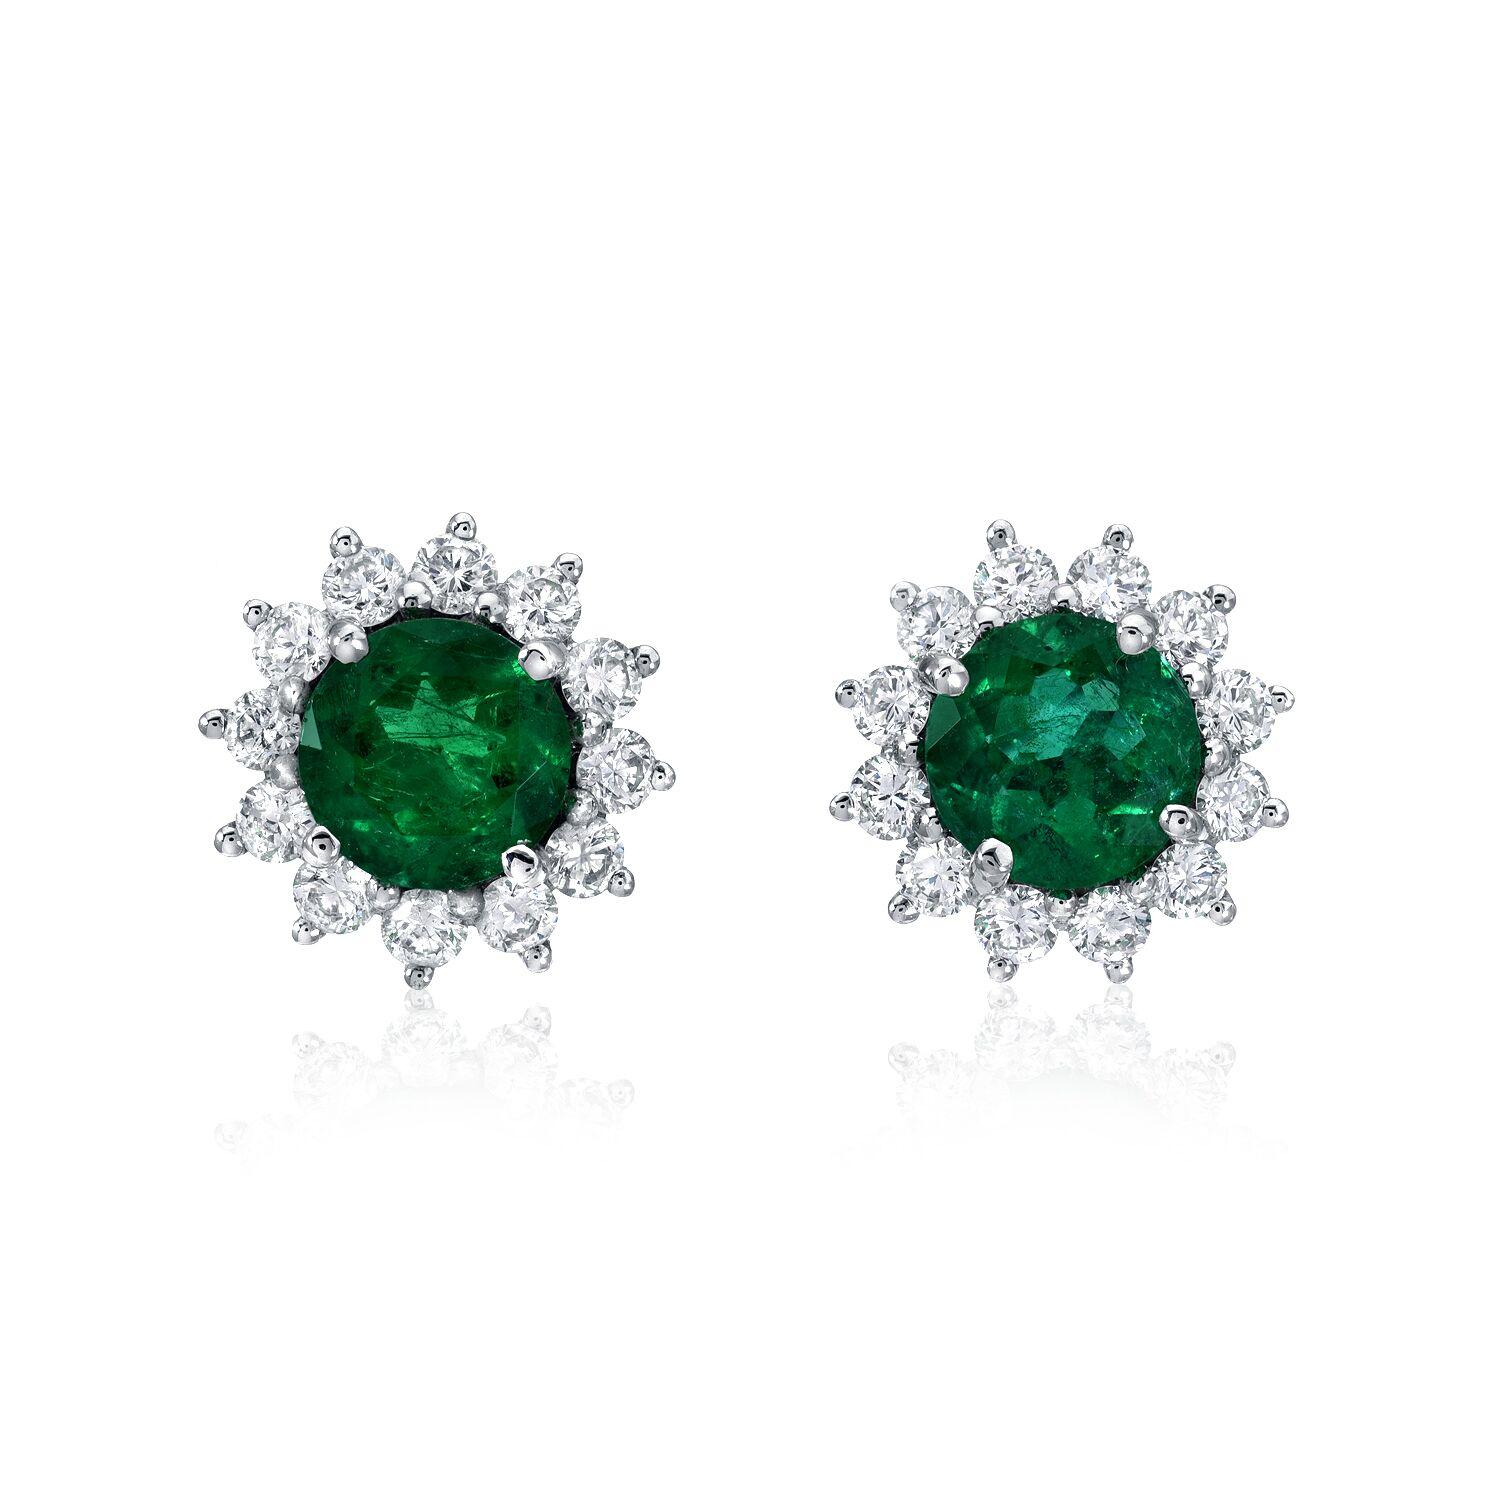 Contemporary Emerald Stud Earrings Rounds 1.29 Carats